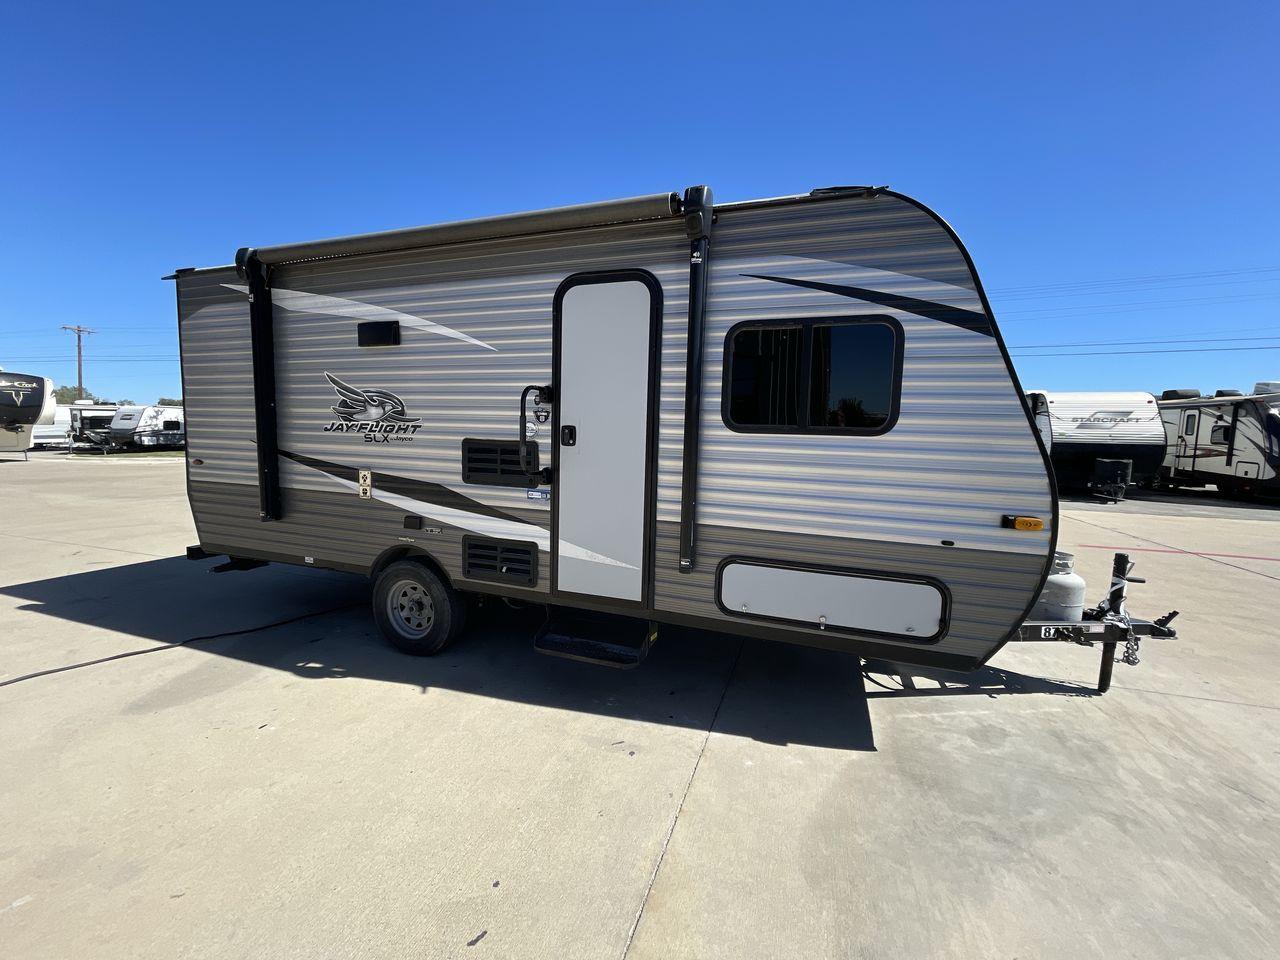 2021 JAYCO JAY FLIGHT SLX 174BH (1UJBJ0AJ1M1) , Length: 21.67 ft | Dry Weight: 3,075 lbs | GVWR: 3,950 lbs | Slides: 0 transmission, located at 4319 N Main St, Cleburne, TX, 76033, (817) 678-5133, 32.385960, -97.391212 - Take the 2021 Jayco Jay Flight SLX 174BH travel trailer out on your camping adventures. This lightweight and small RV is ideal for people looking for an affordable and cozy way to enjoy the great outdoors. The dimensions of this unit are 21.67 ft in length, 7.08 ft in width, and 9.17 ft in height. I - Photo #22